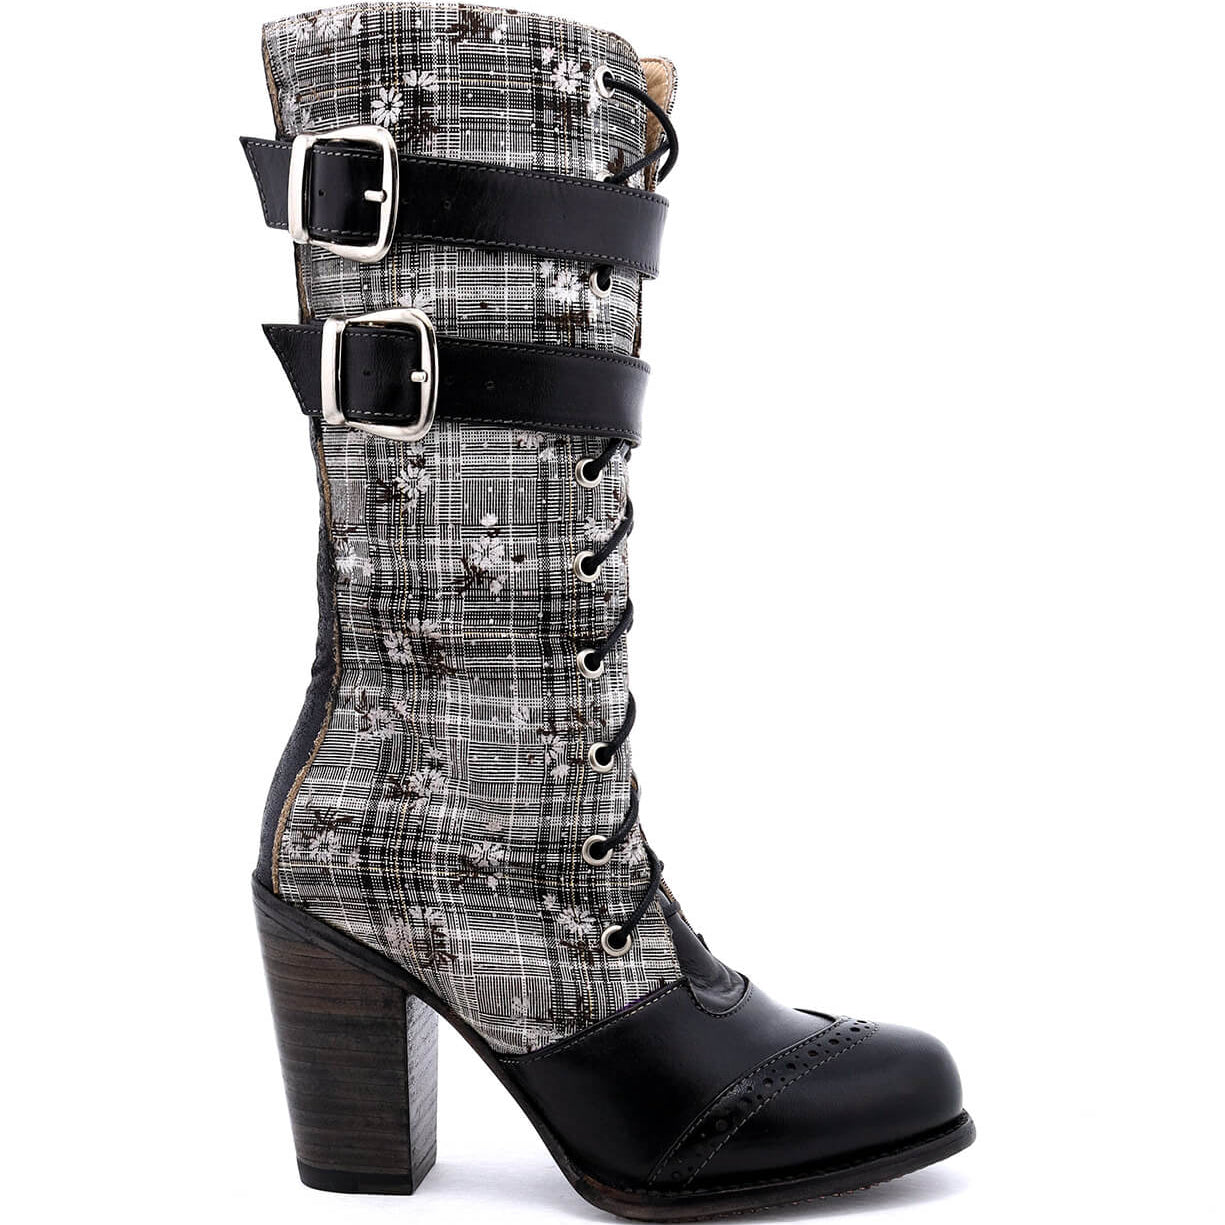 A pair of Oak Tree Farms Arabella black leather boots with buckles featuring a whimsical print.